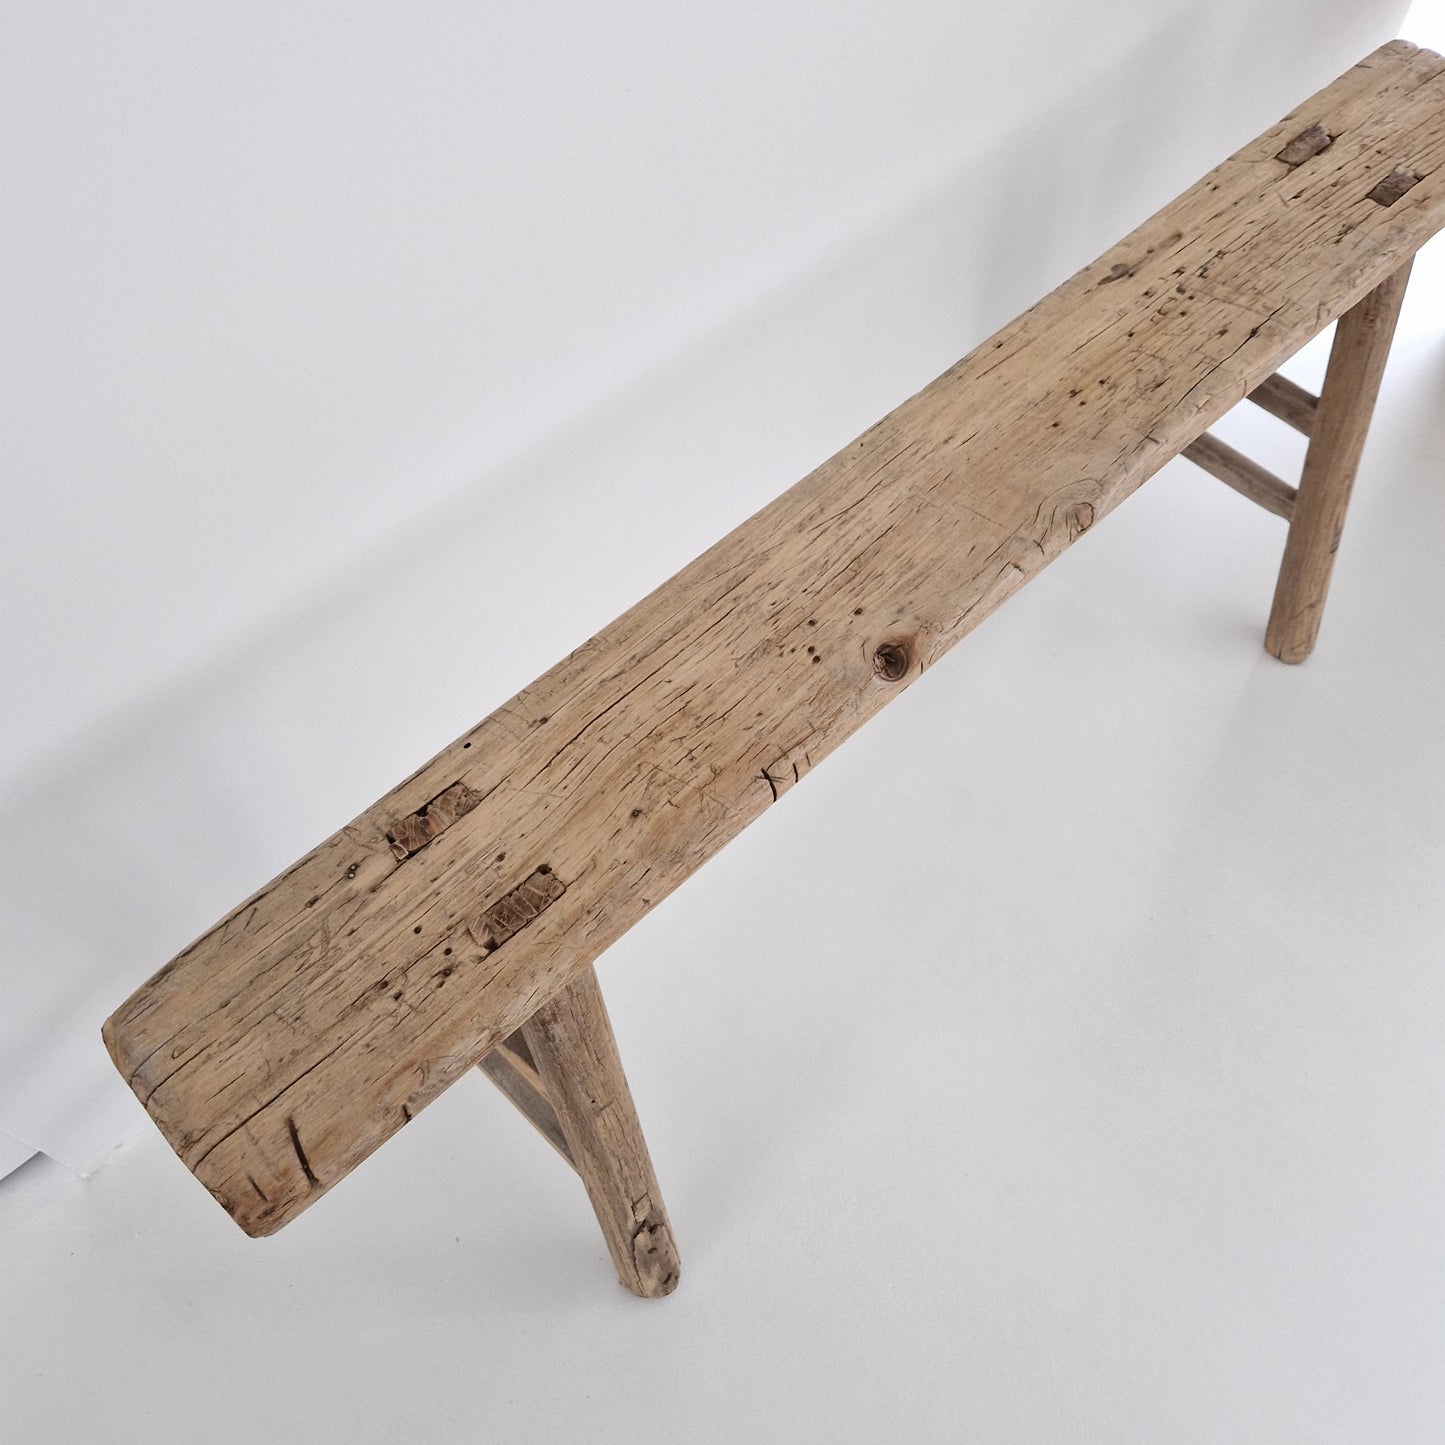 Old wooden bench #6 (118,5cm)